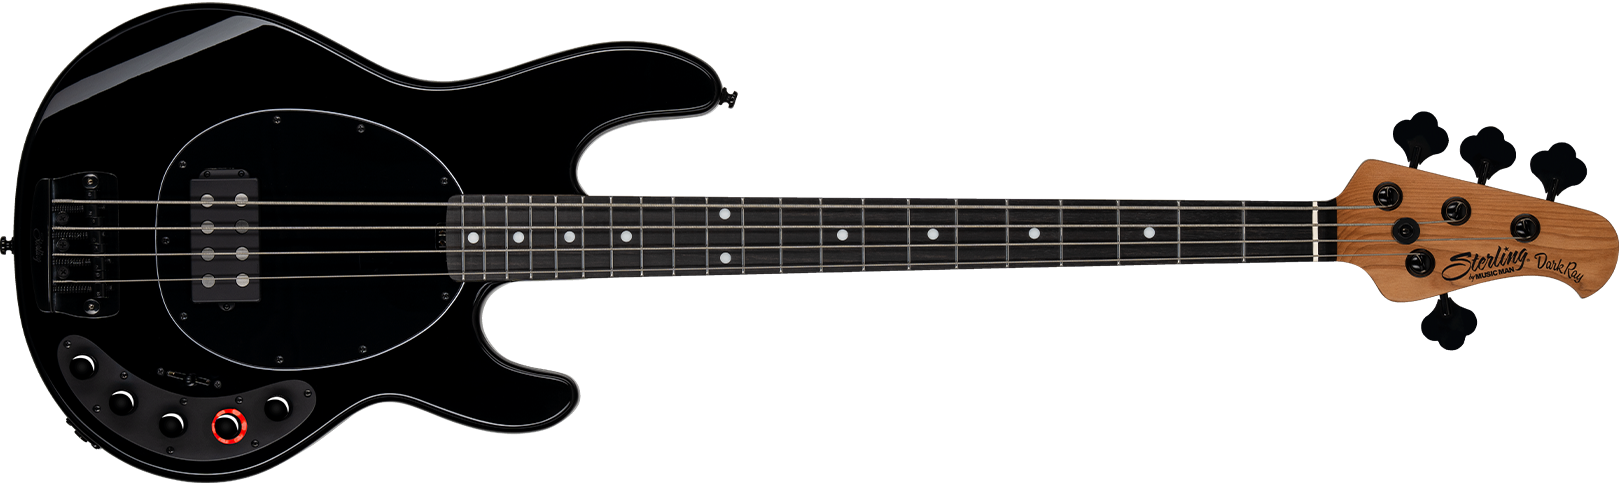 Front details of the DarkRay bass in black